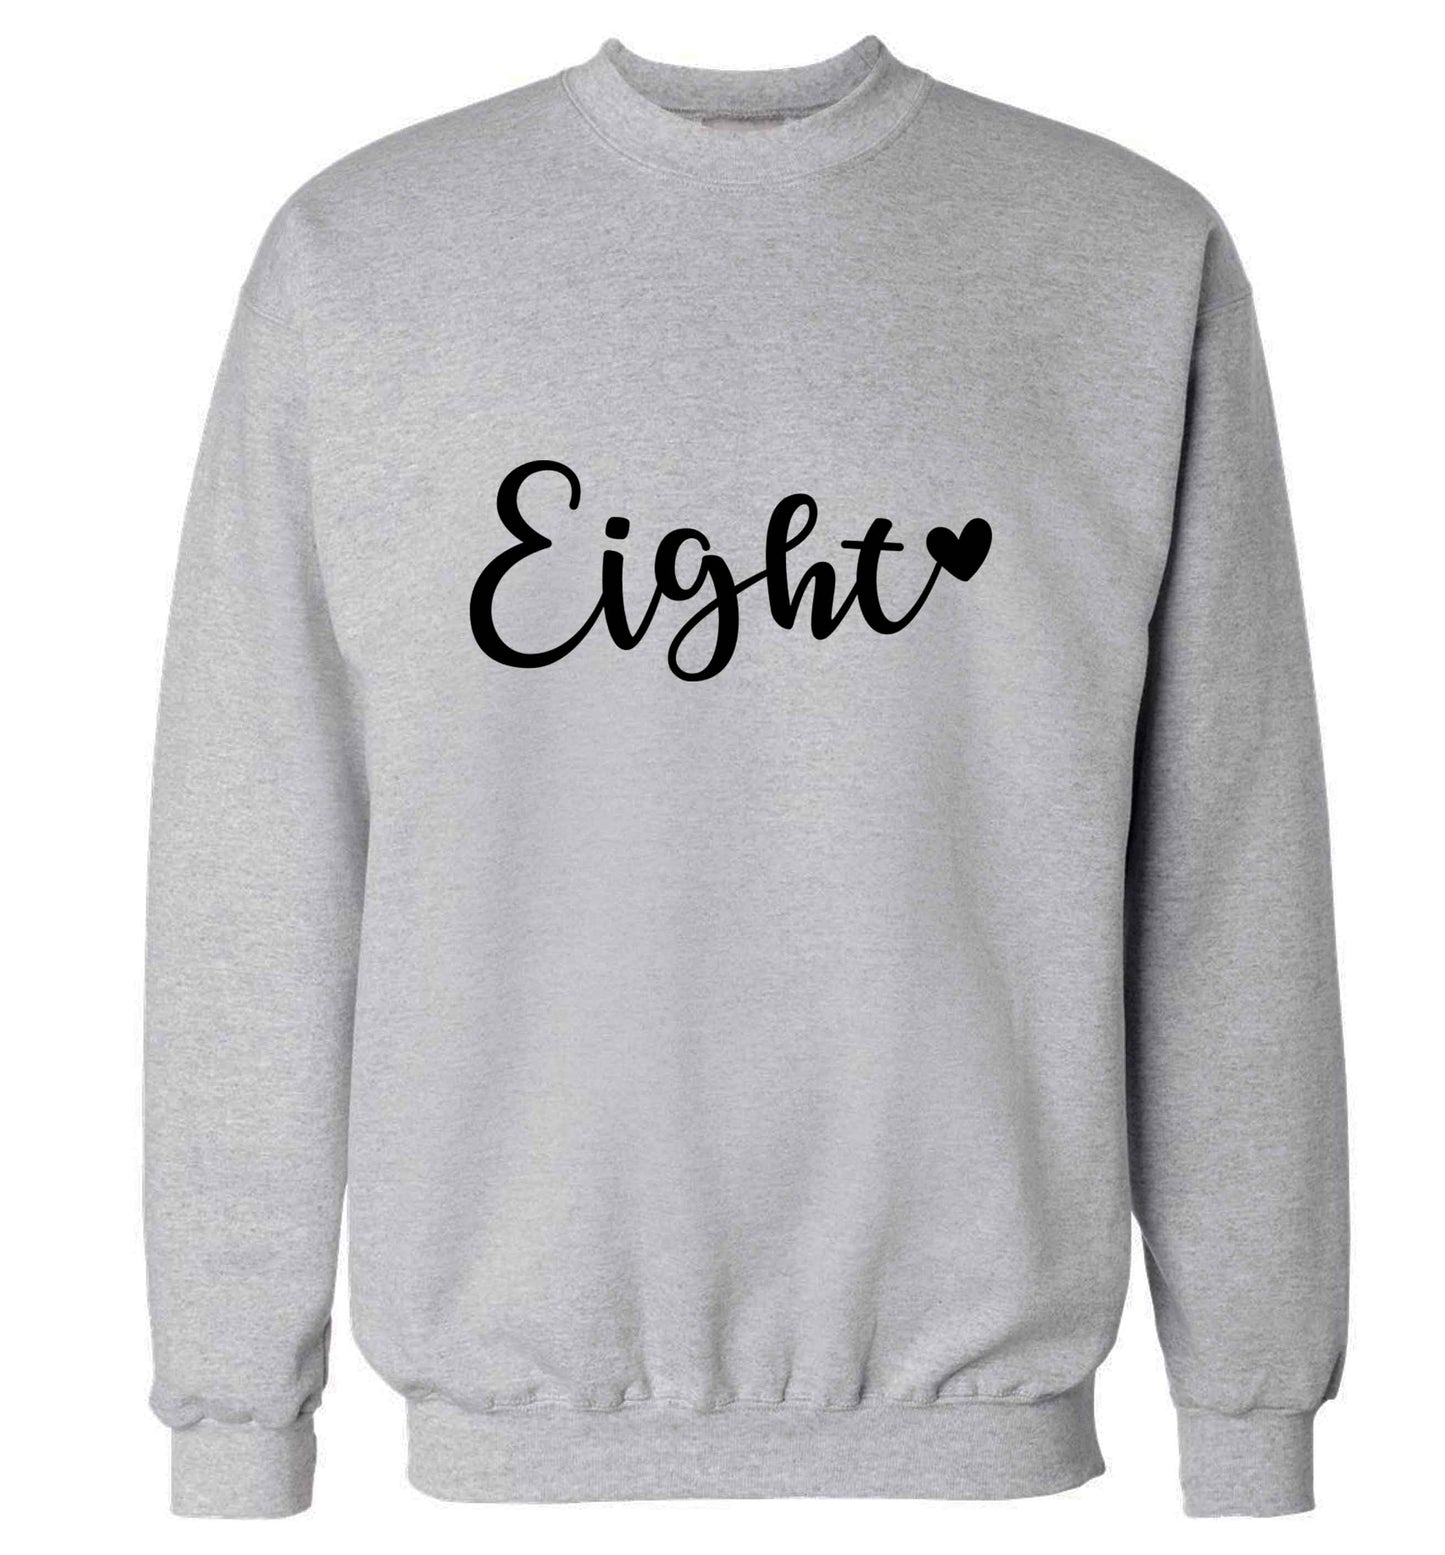 Eight and heart adult's unisex grey sweater 2XL